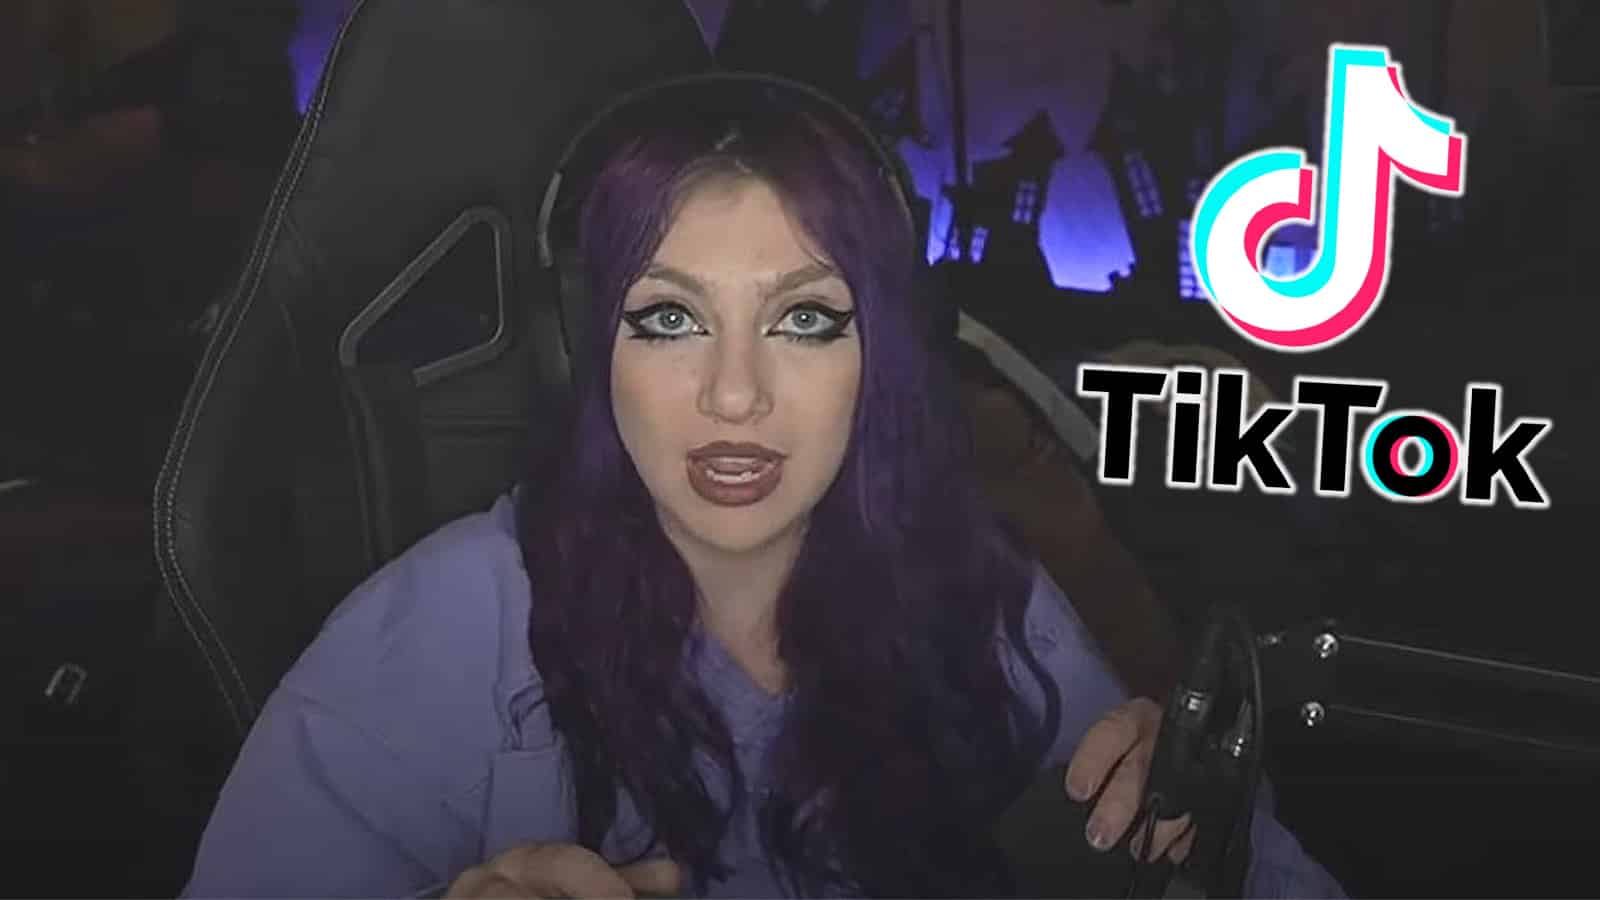 justaminx pleads with tiktok to stop mass reporting harassment